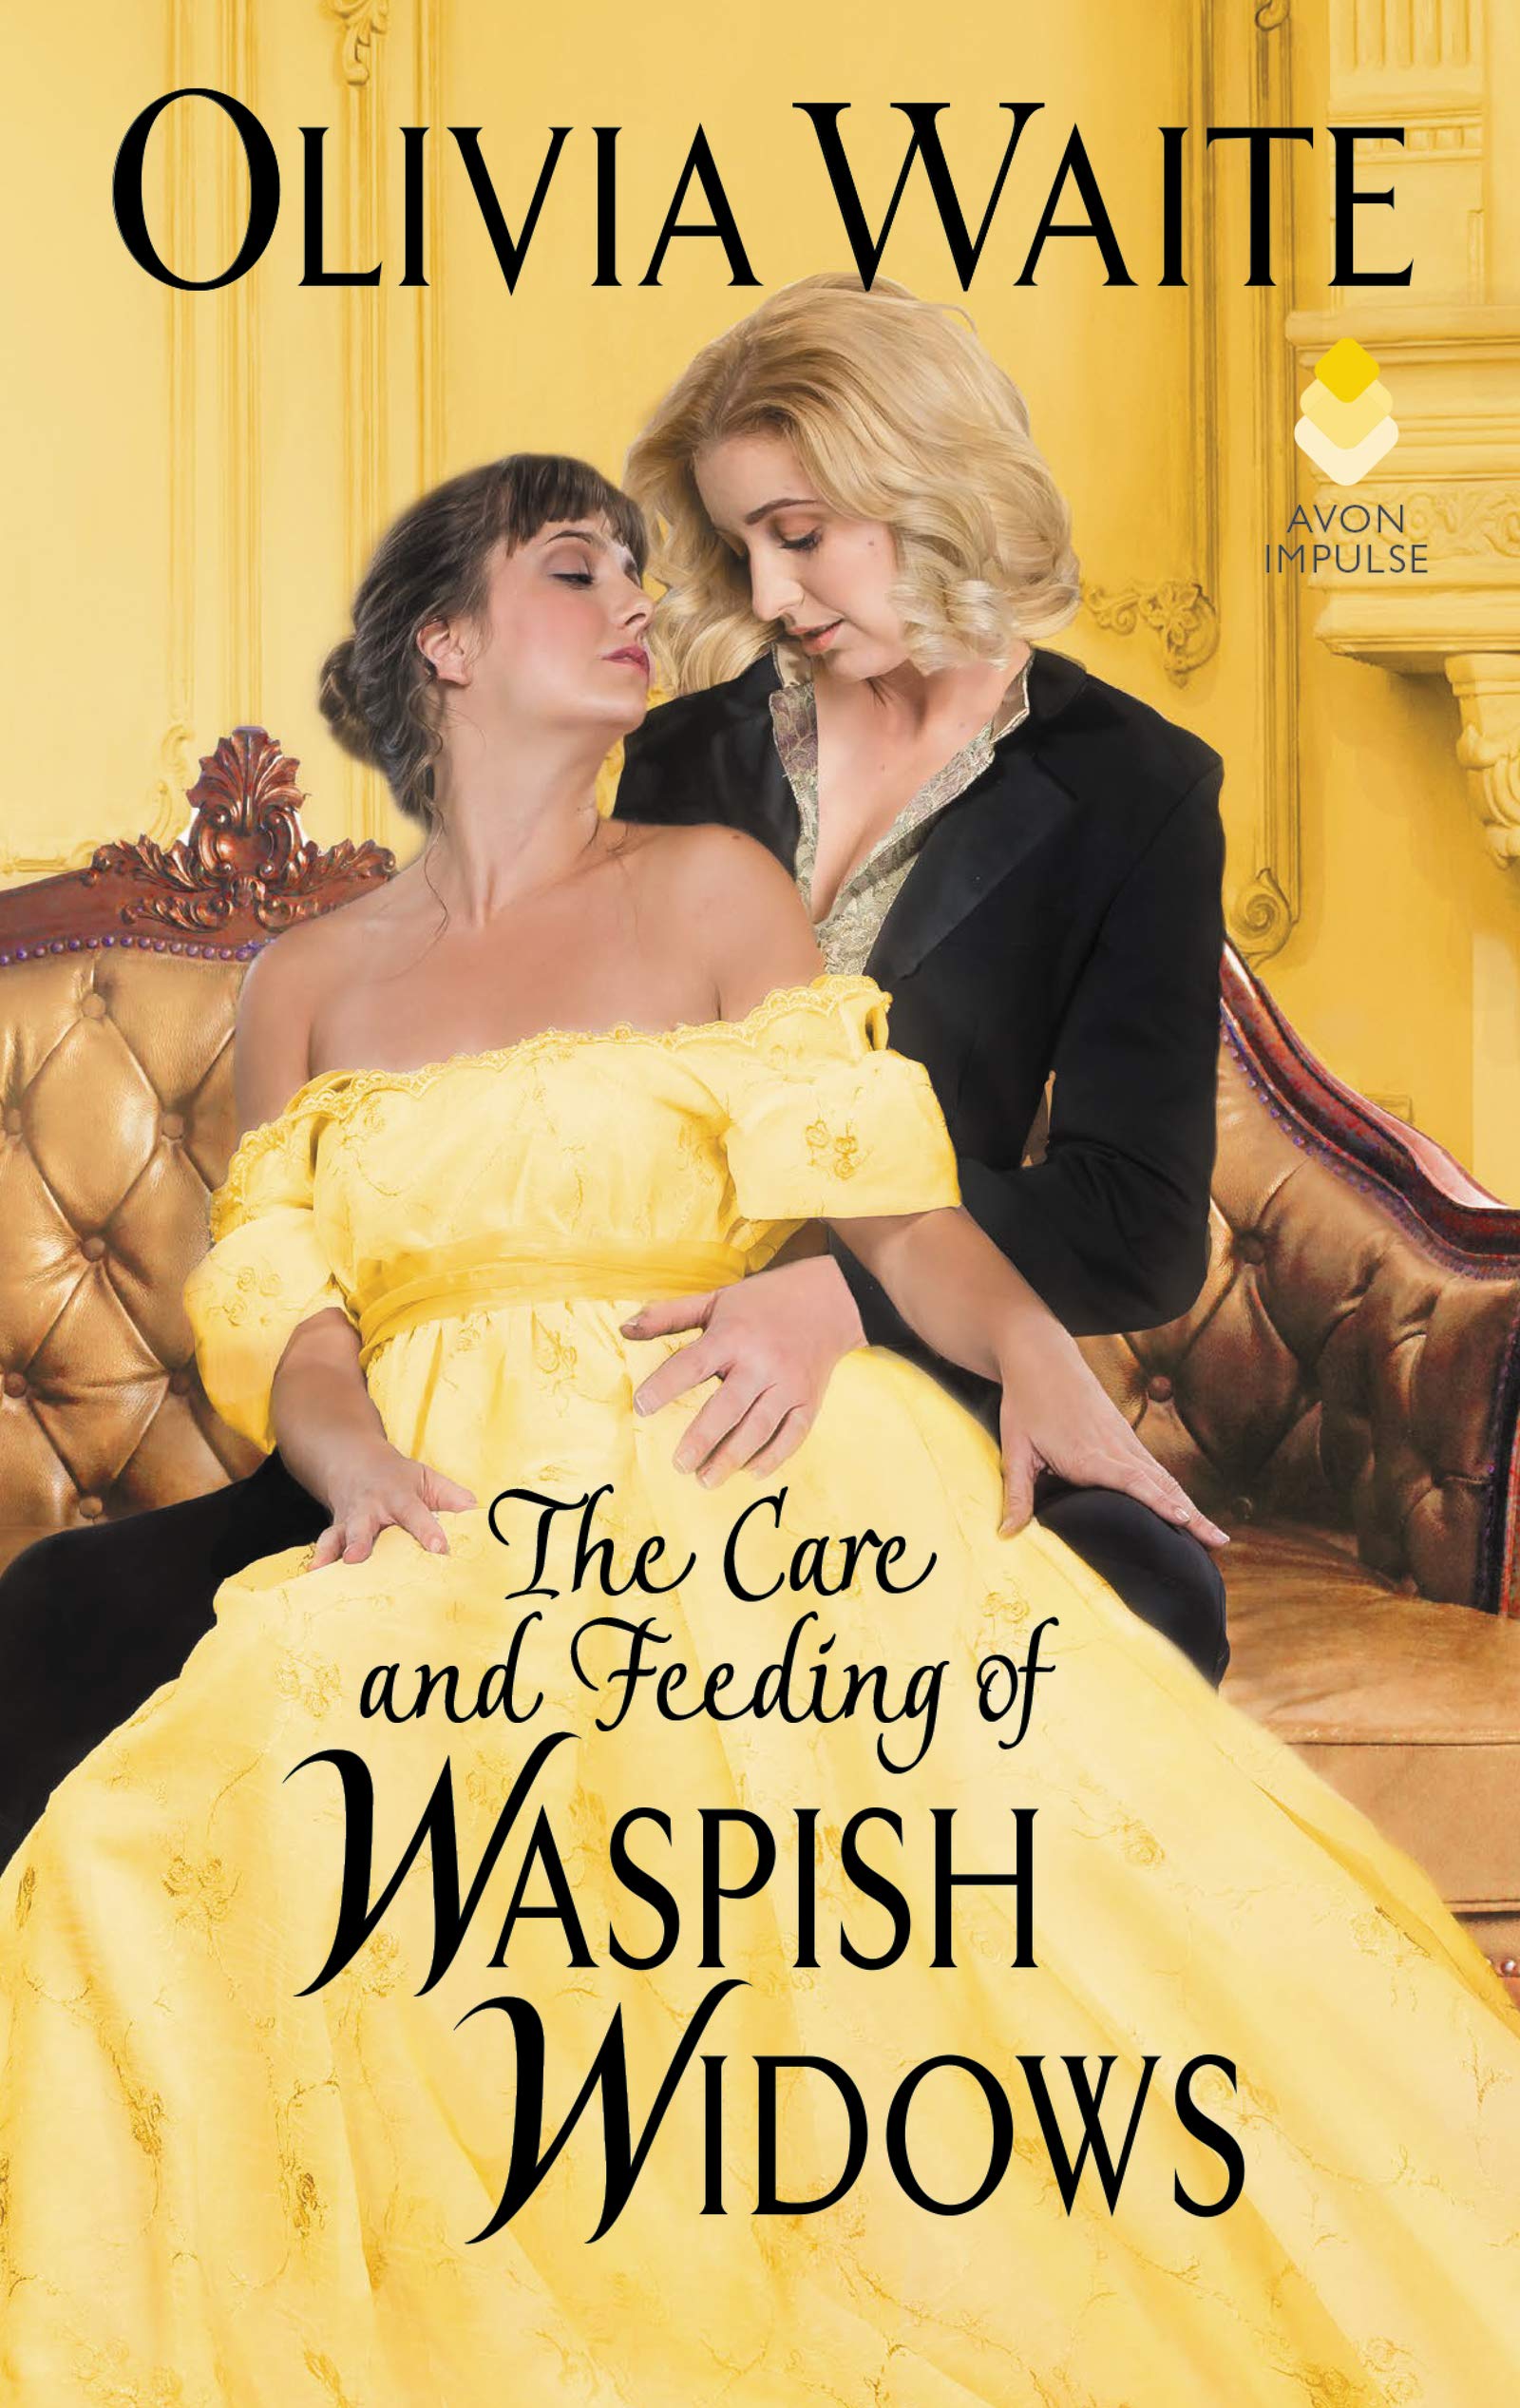 Image of the book cover that has two women, one wearing a long golden dress and the other woman has a blazer type suit, both are looking at each other with their eyes closed.